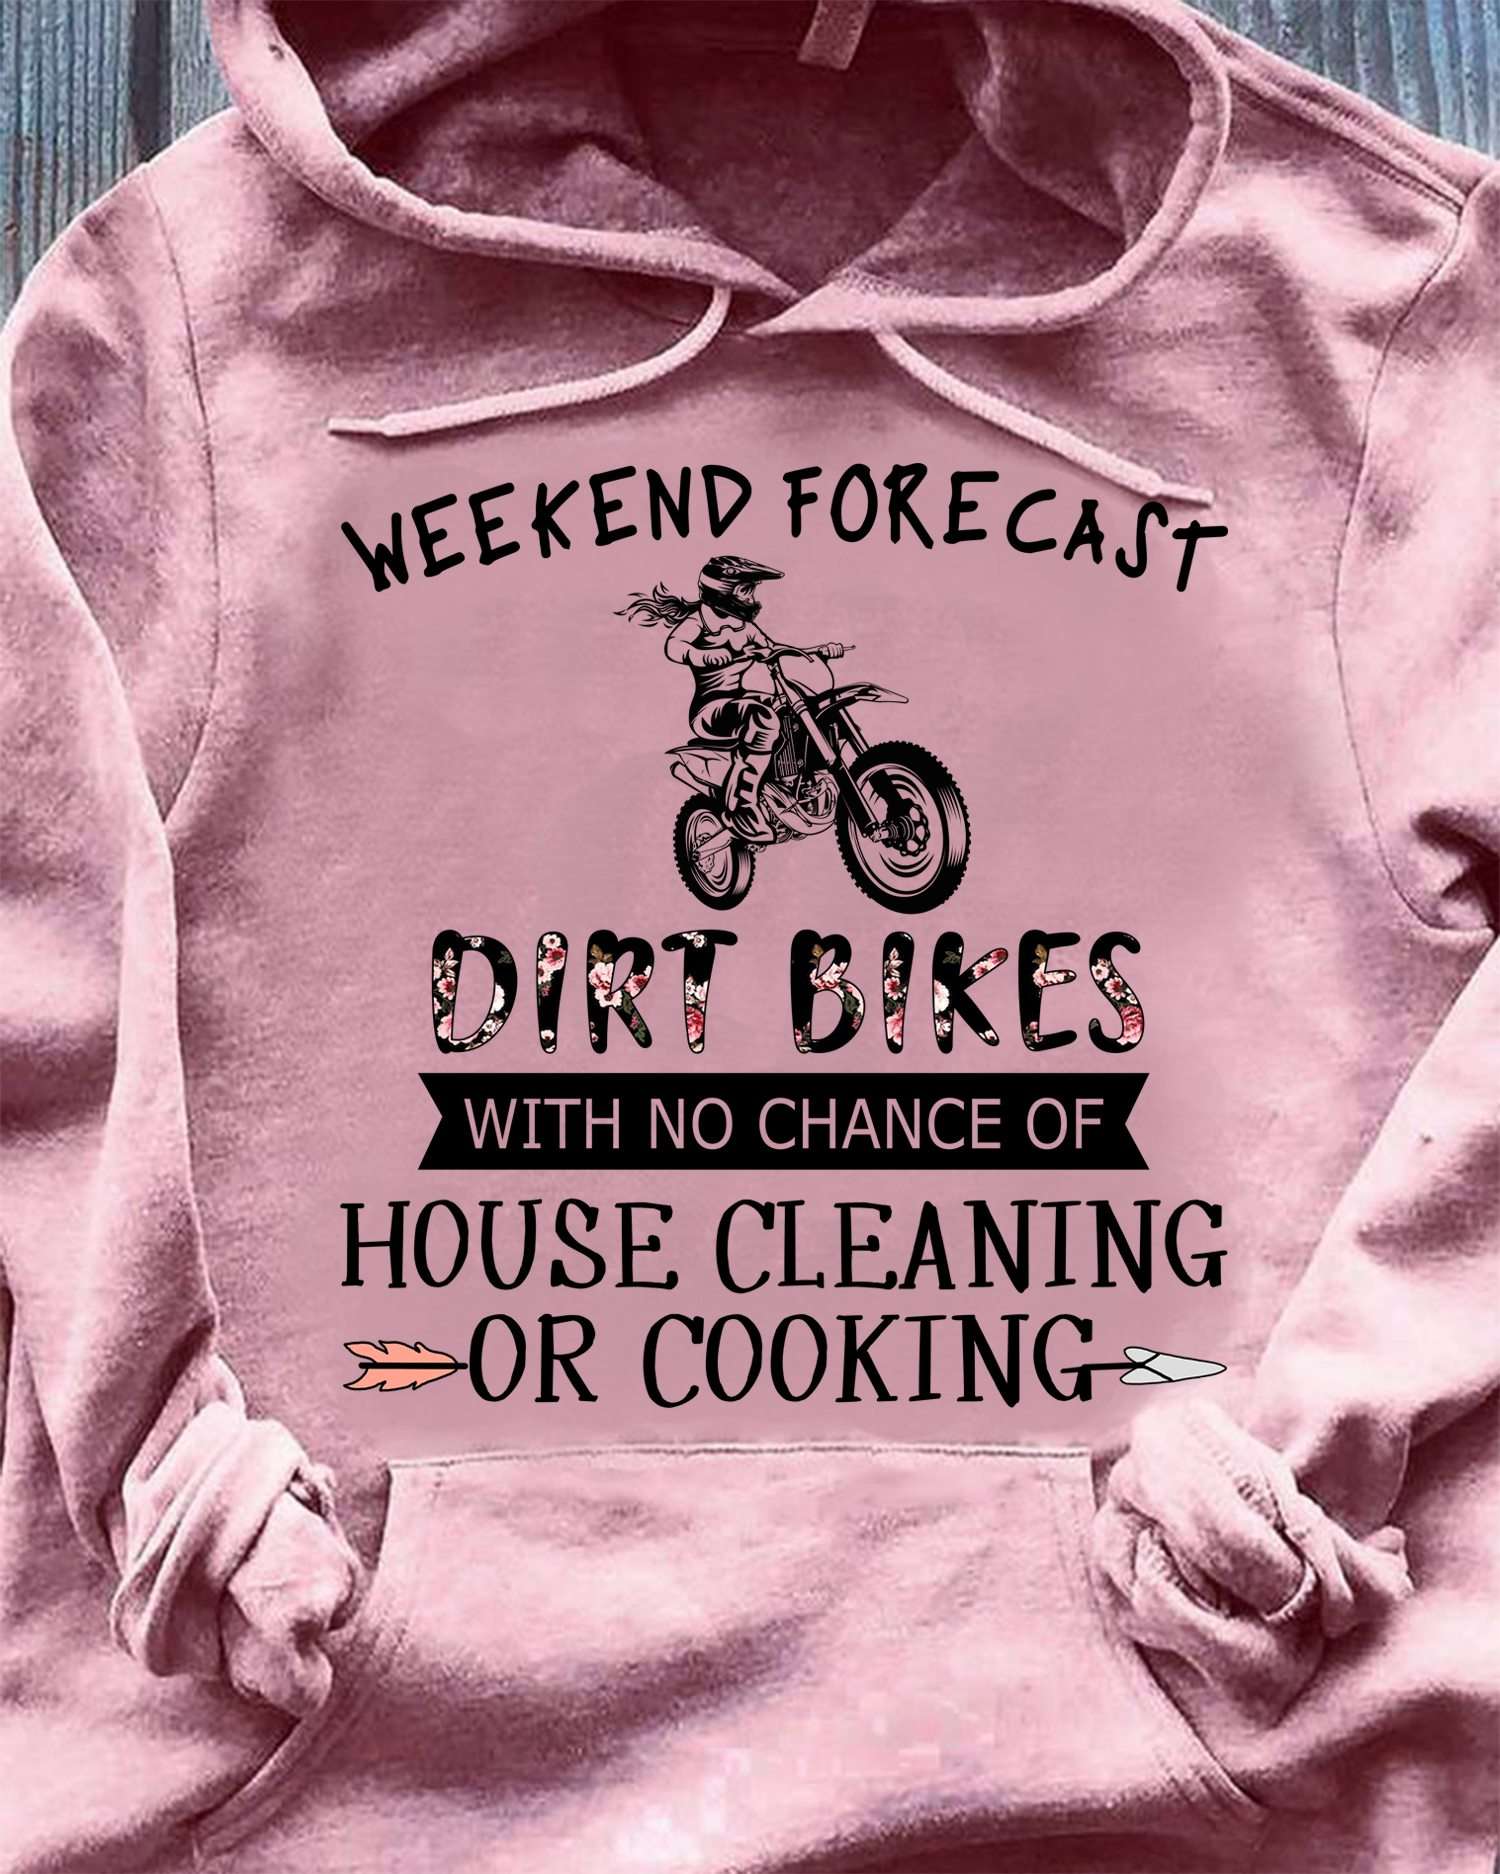 Weekend forecast dirt bikes with no chance of house cleaning or cooking